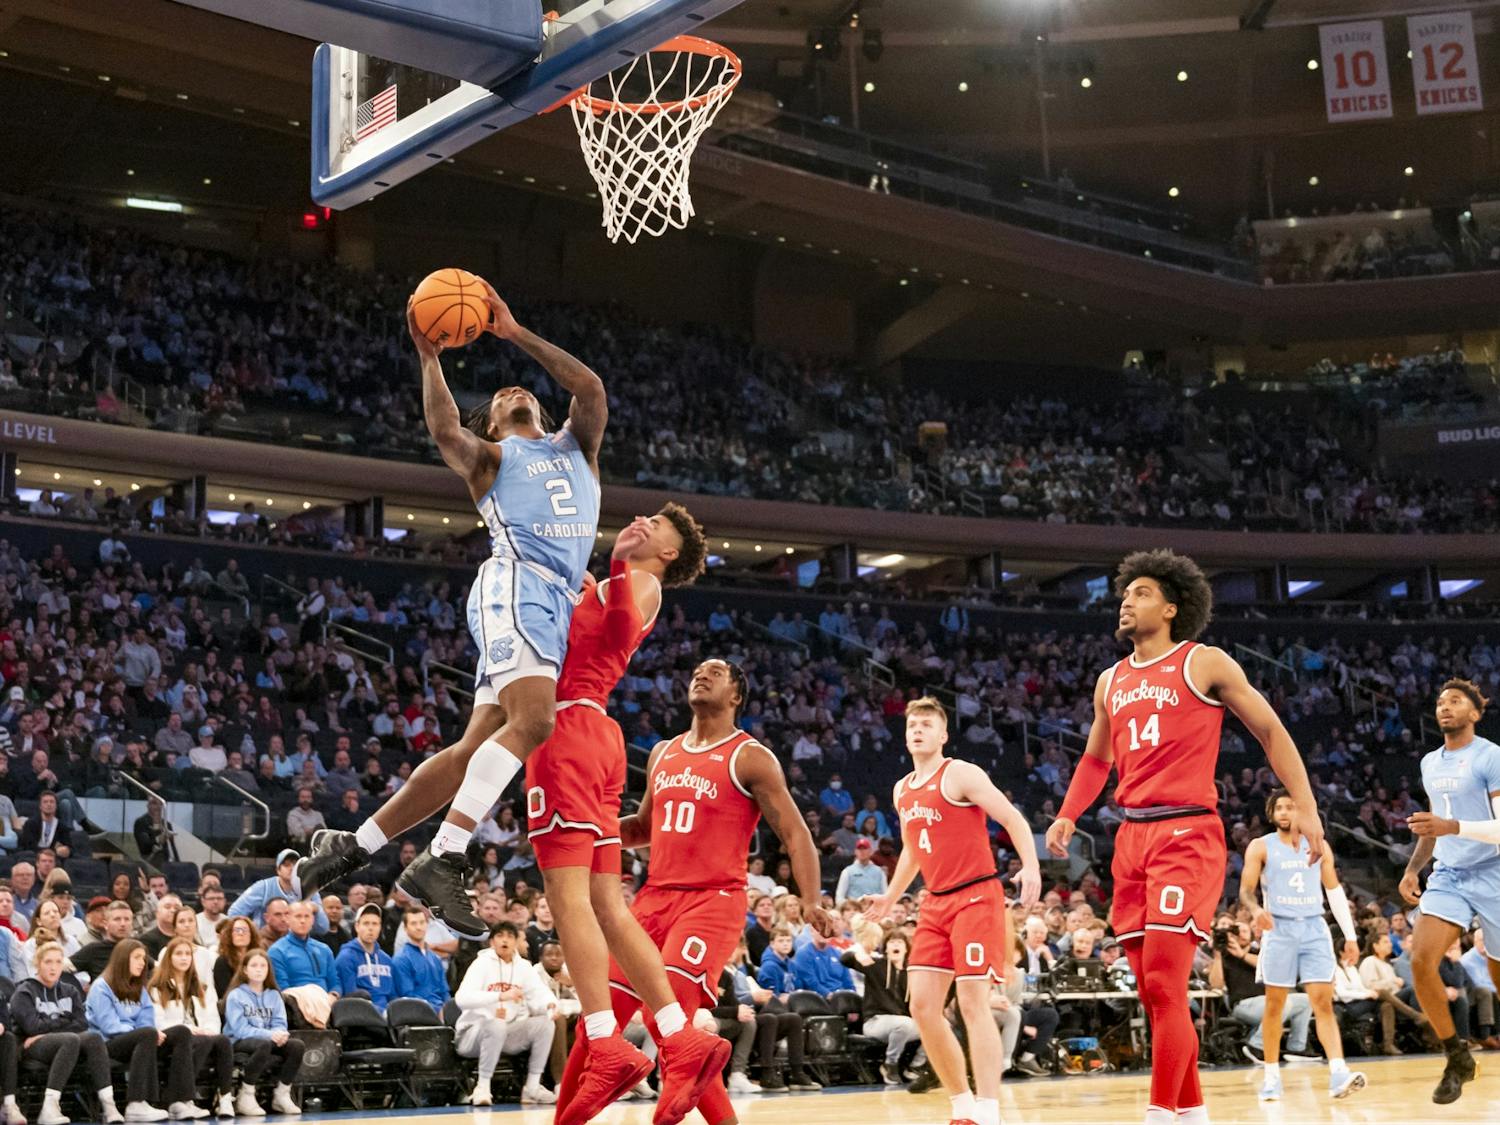 UNC junior guard Caleb Love (2) leaps past Ohio State defense toward the basket during the men's basketball game against Ohio State at Madison Square Garden on Saturday, Dec. 17, 2022. UNC beat Ohio State 89-84.